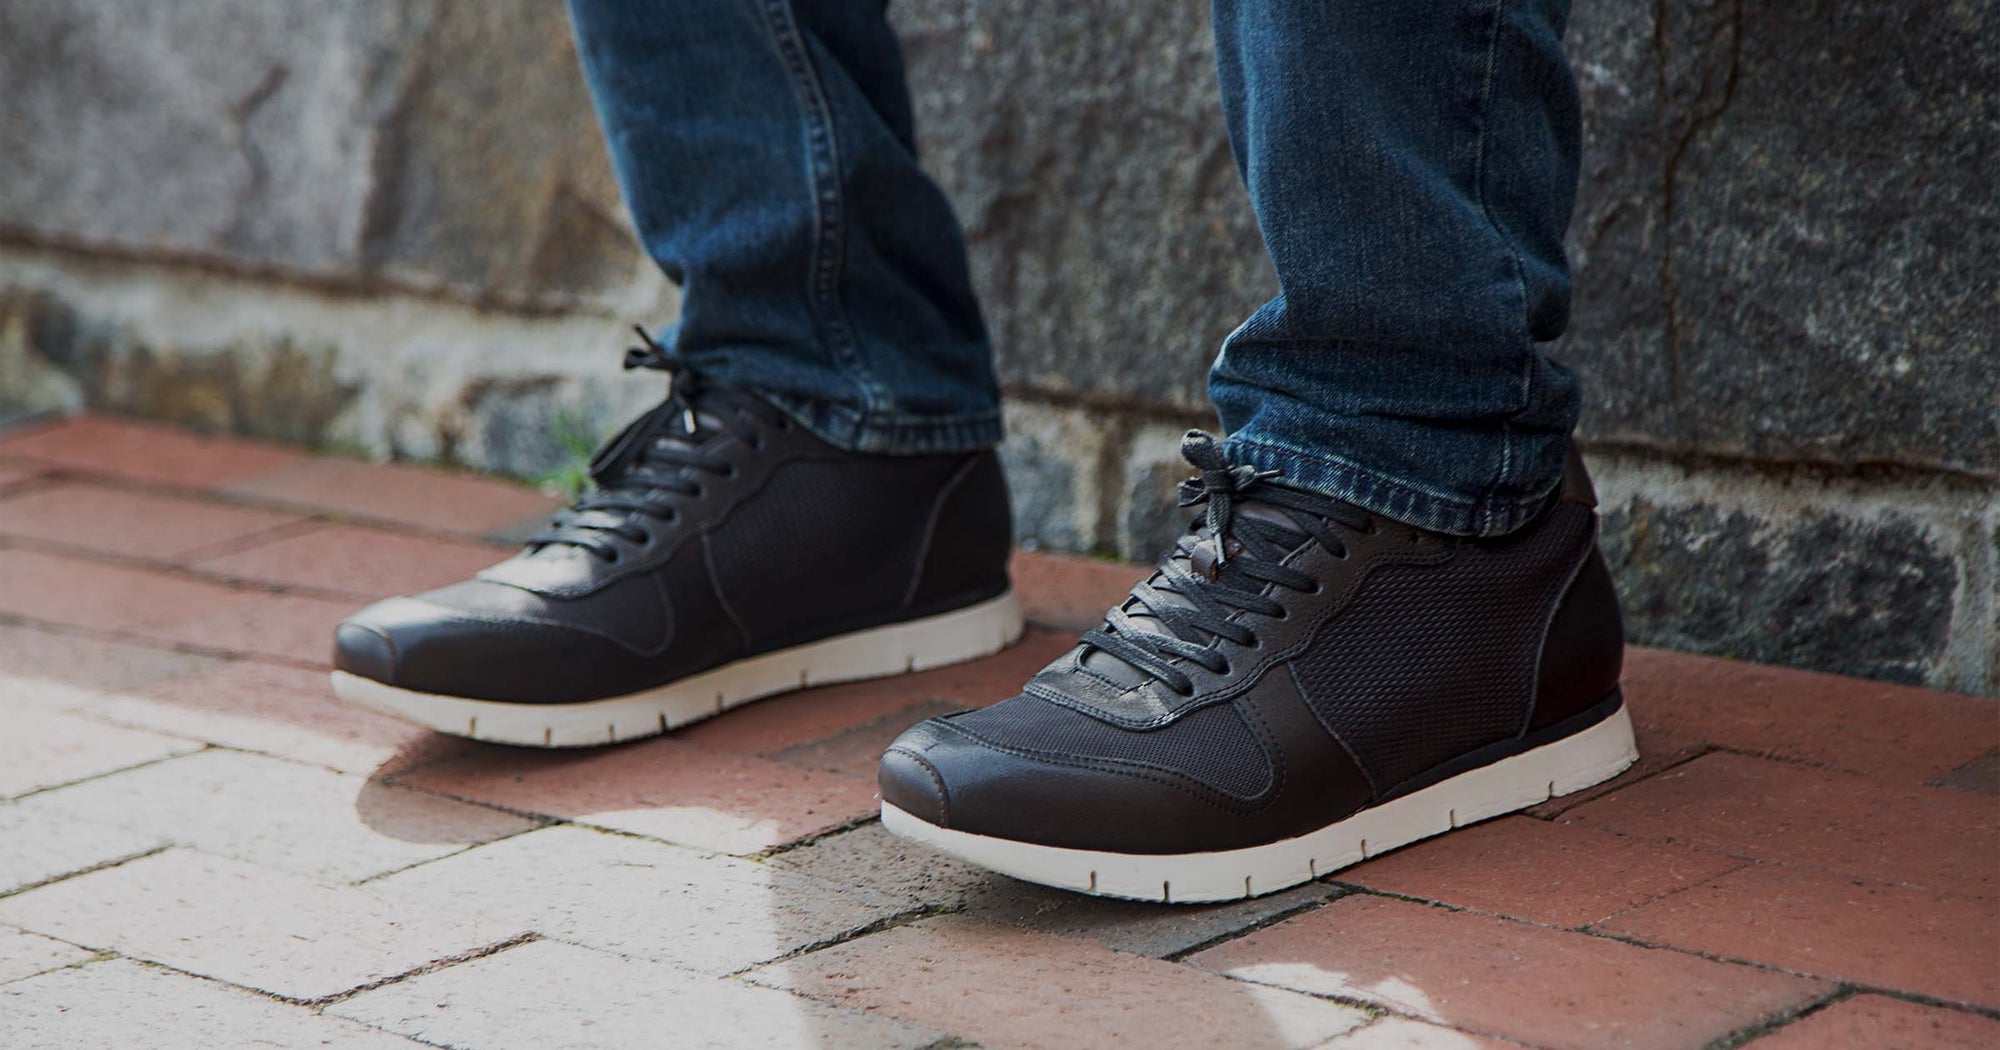 Introducing OTBT’s NEW Men’s Collection - OTBT shoes